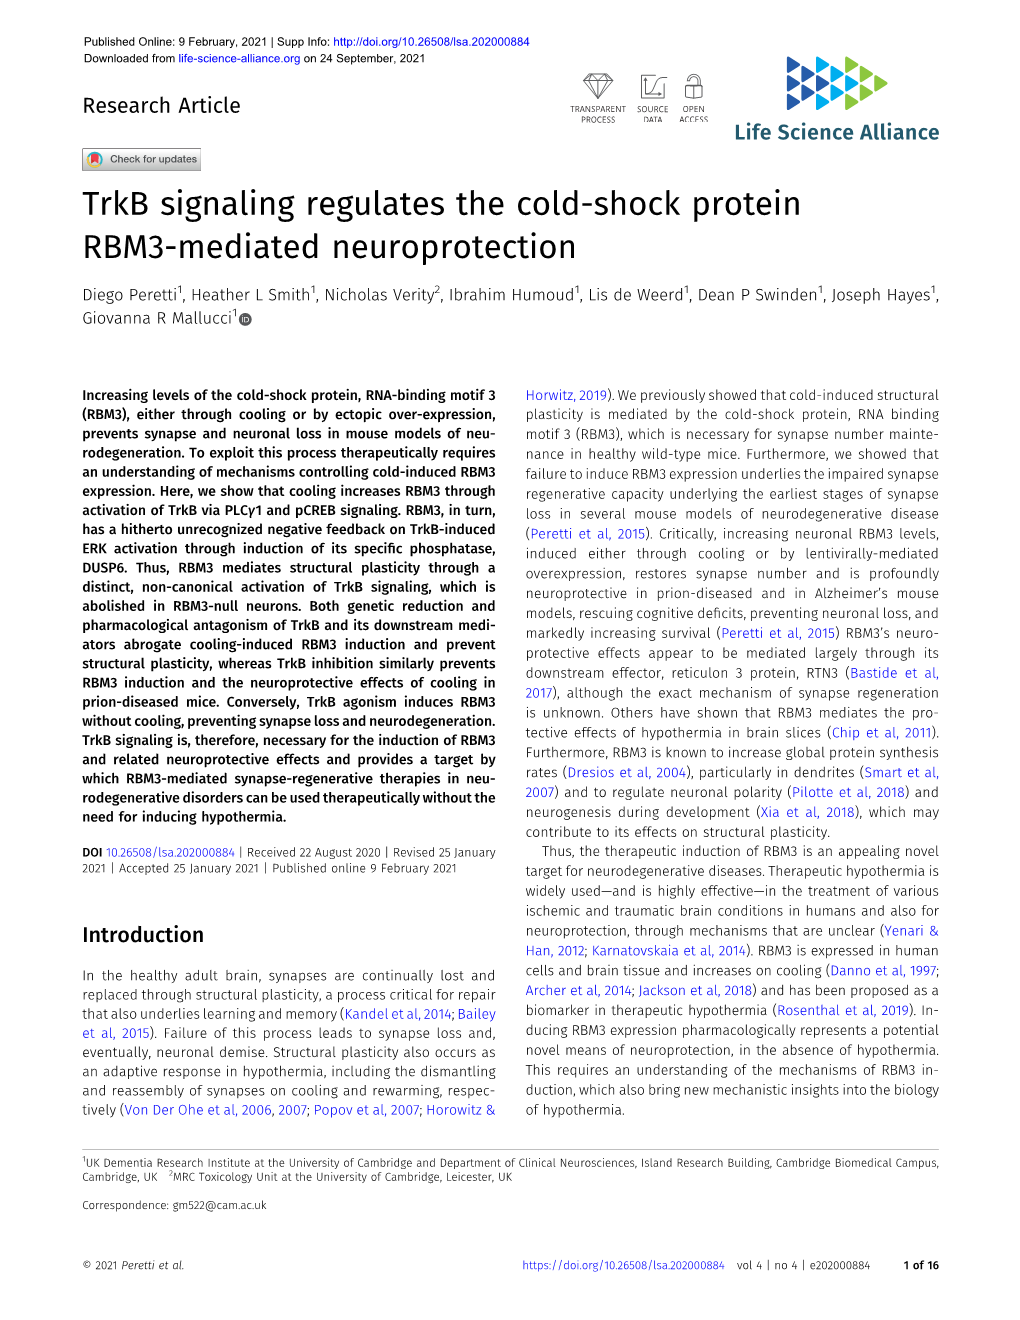 Trkb Signaling Regulates the Cold-Shock Protein RBM3-Mediated Neuroprotection